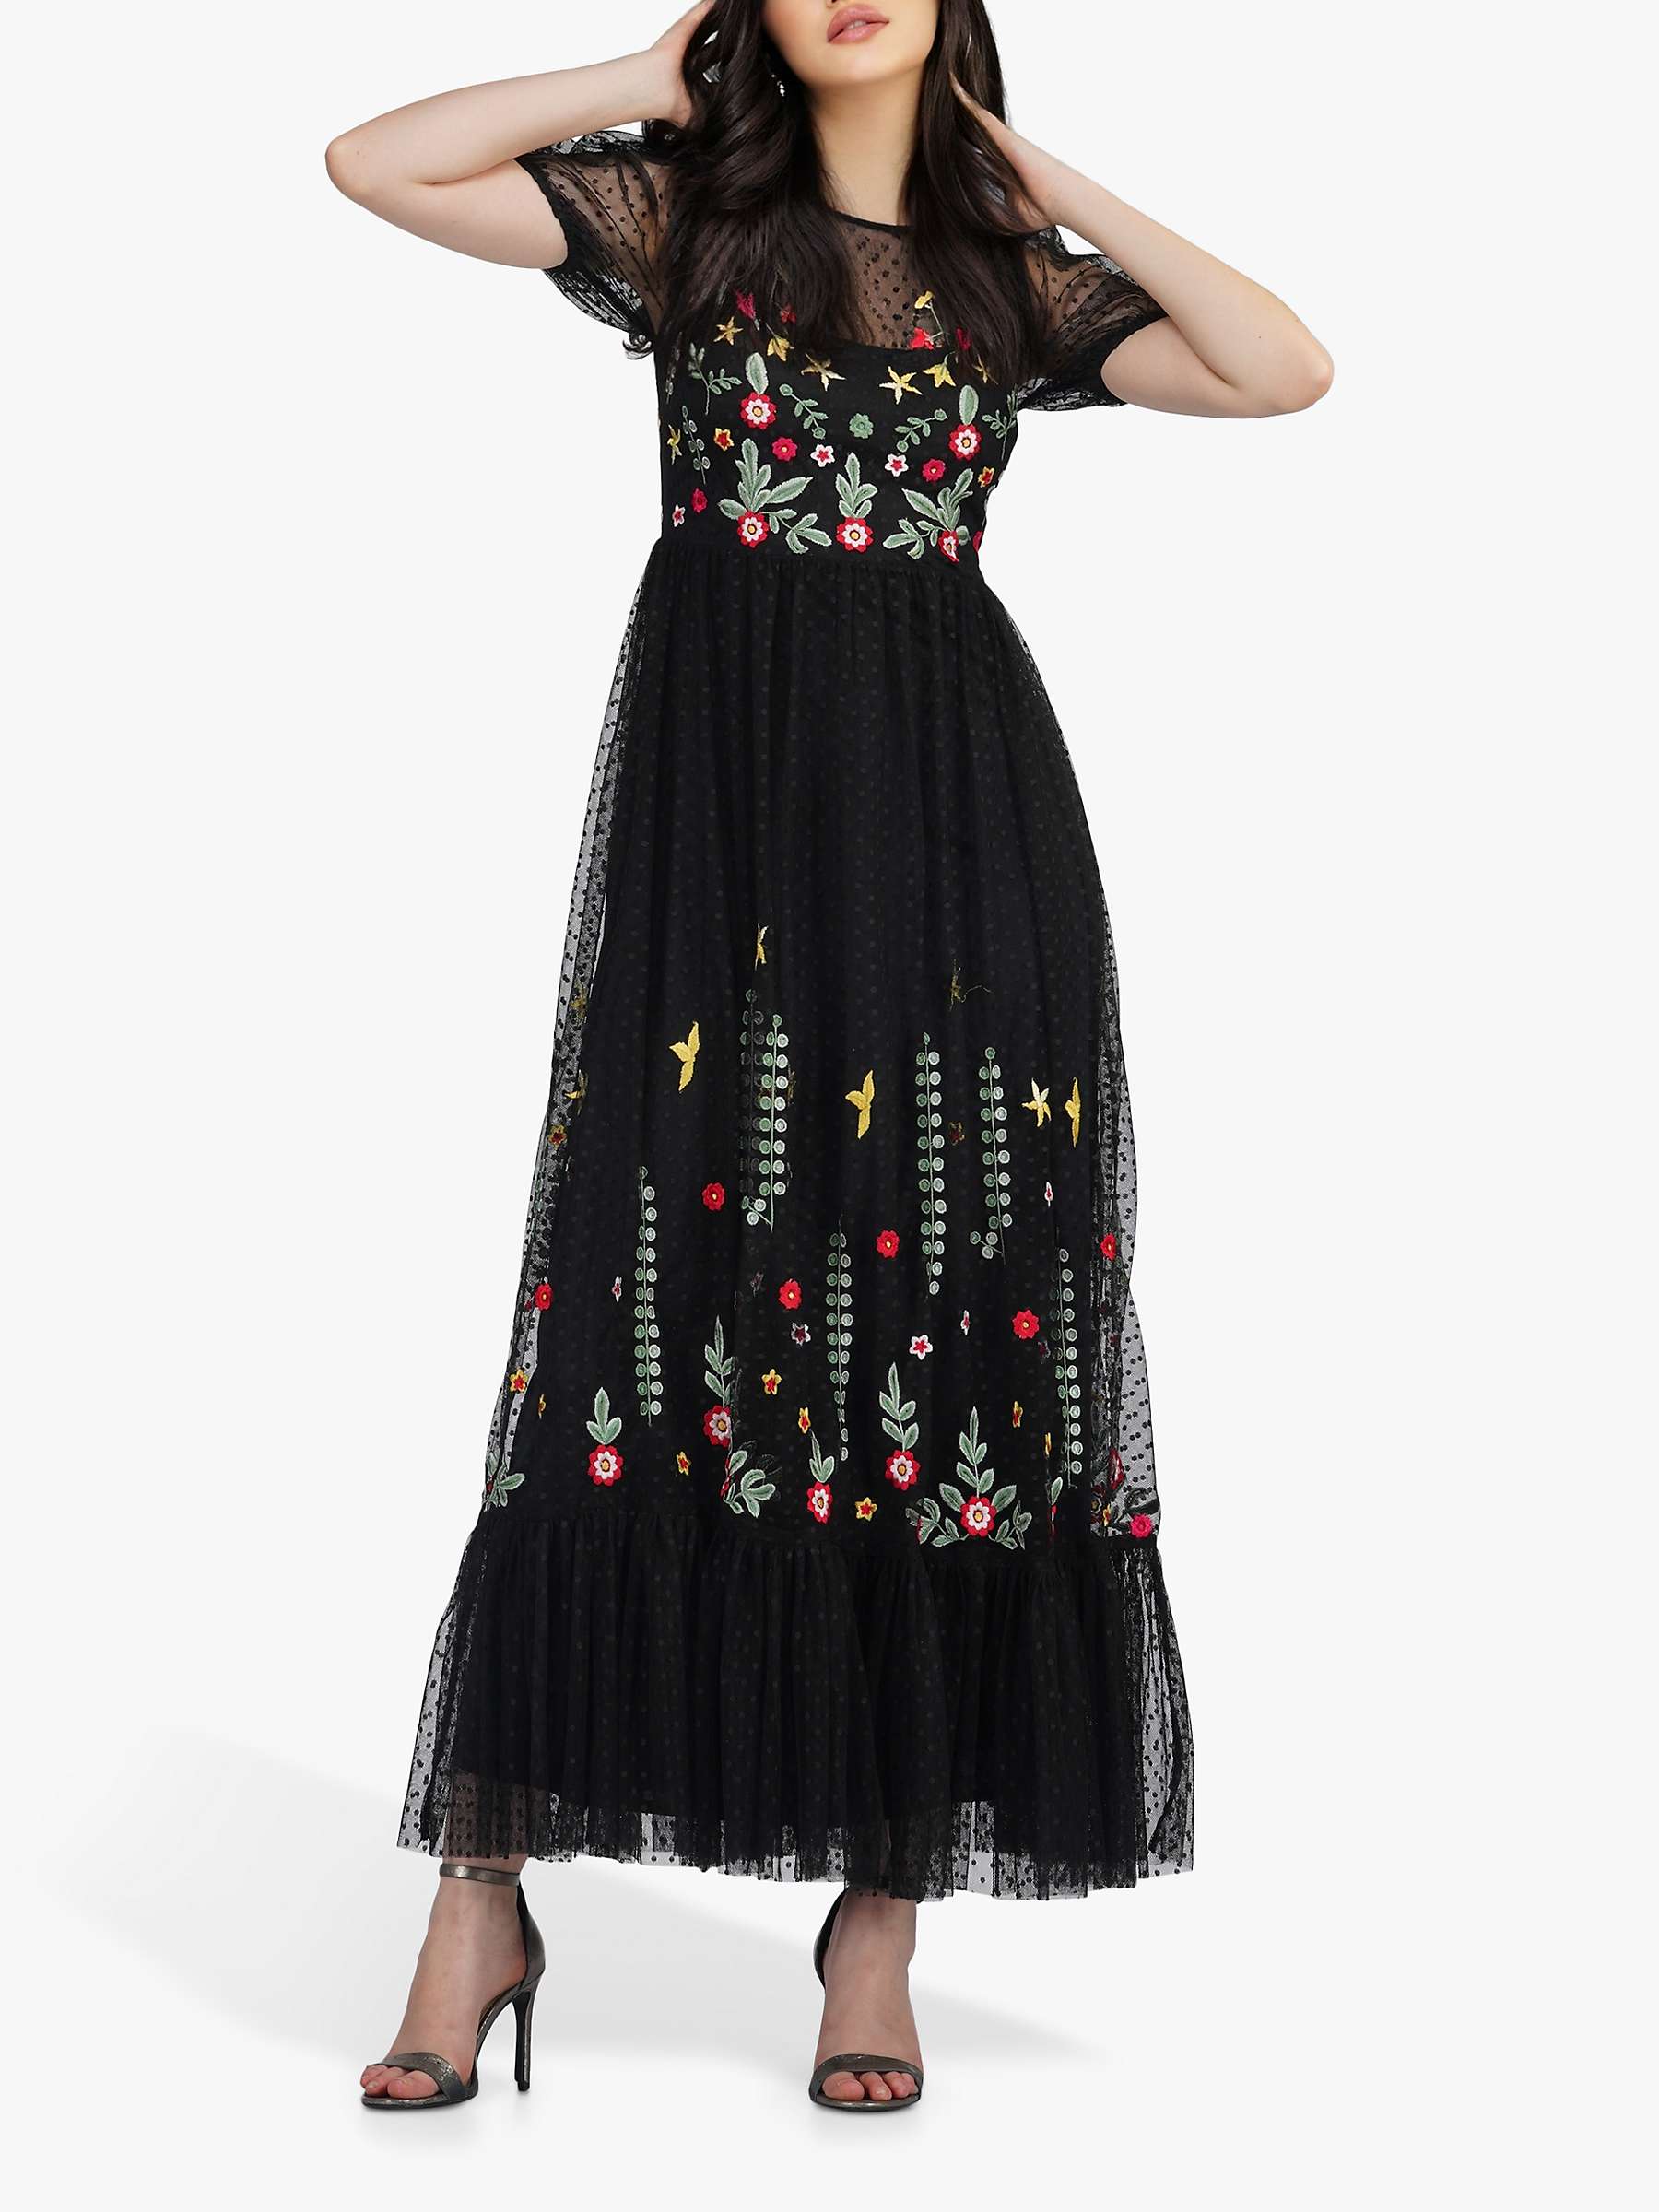 Buy Lace & Beads Dahlia Tulle Embroidered Maxi Dress, Black/Multi Online at johnlewis.com